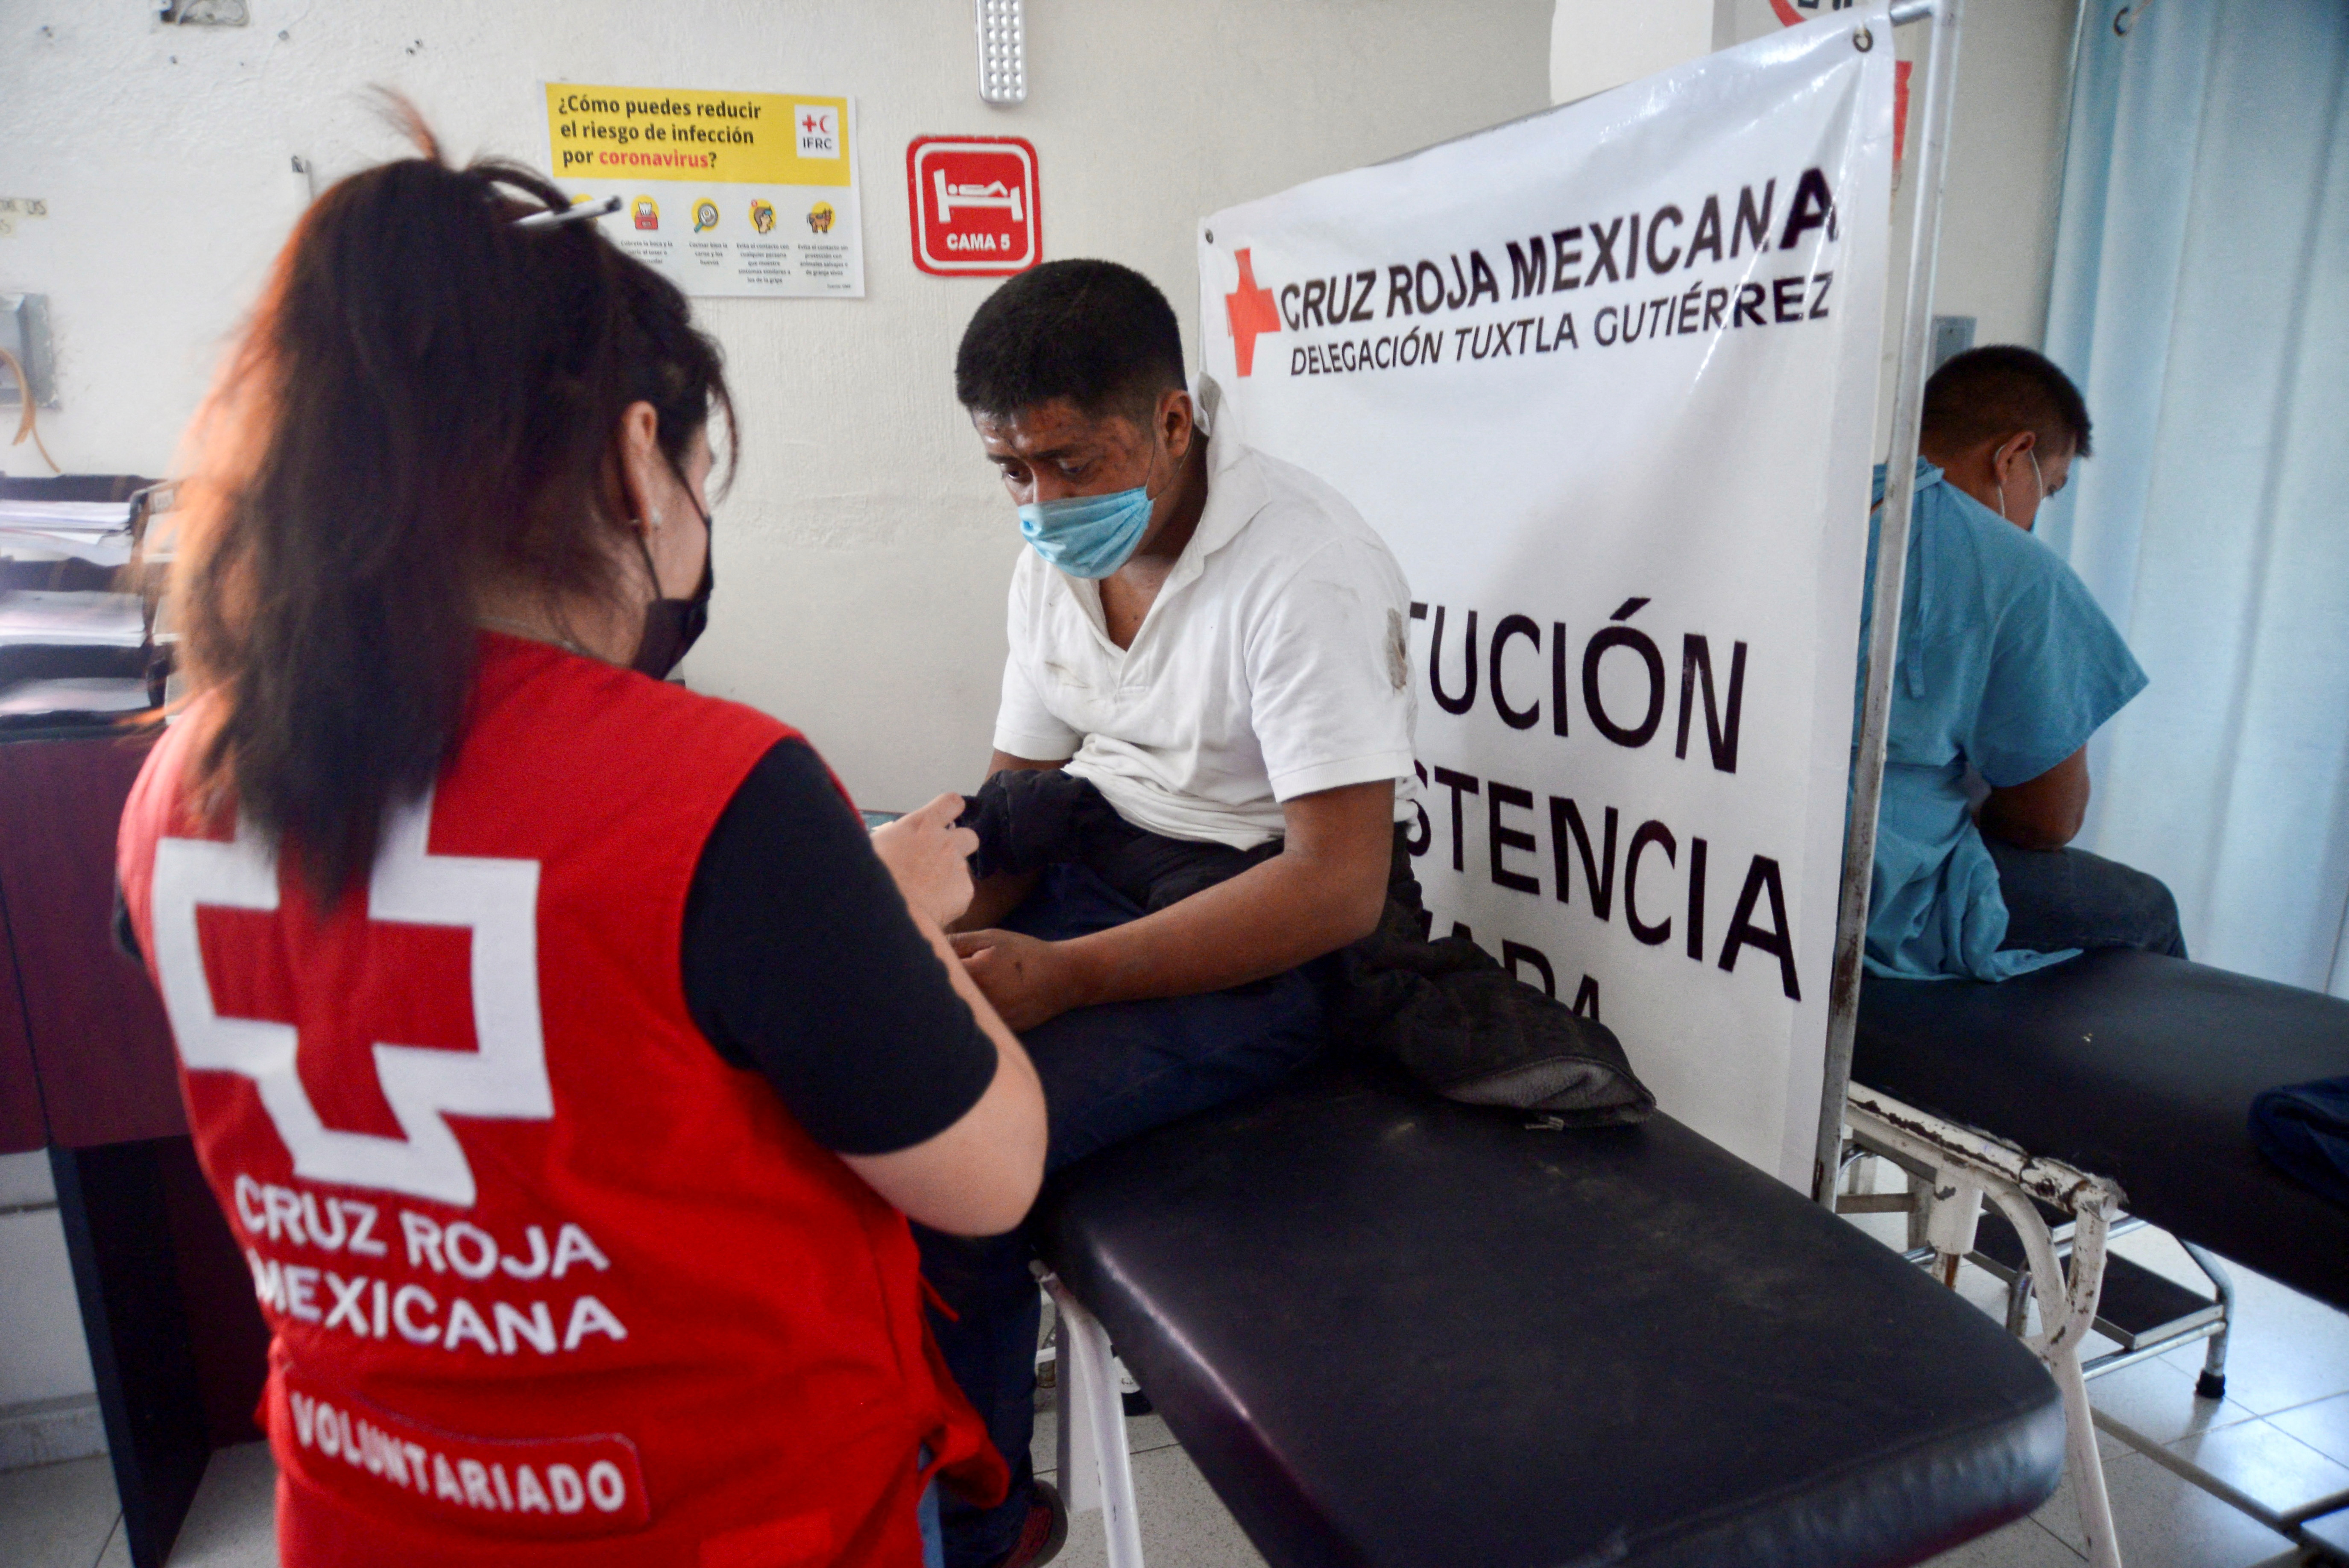 People injured in a truck accident are treated at the Red Cross clinic in Tuxtla Gutierrez